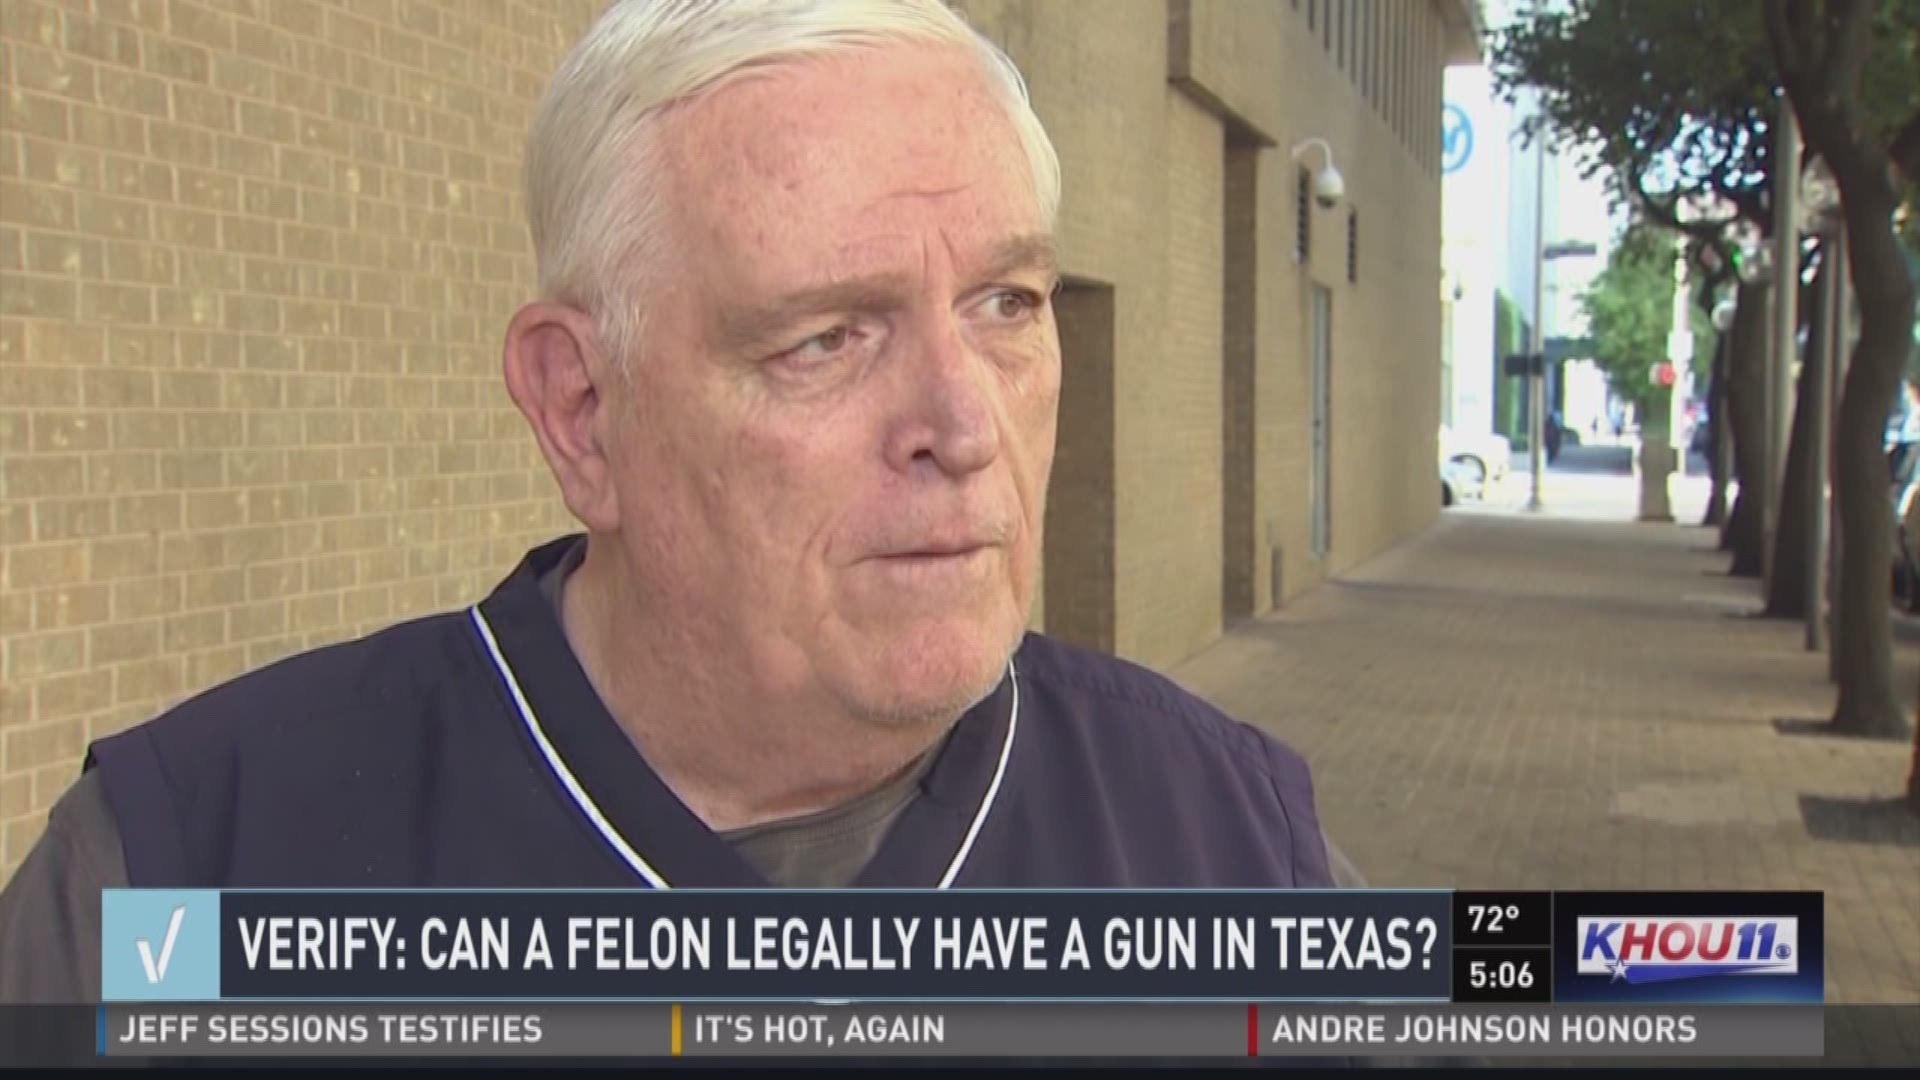 In the aftermath of the Sutherland Springs Shooting, a viewer reached out to our Verify Team asking if a felon can legally have a firearm. 